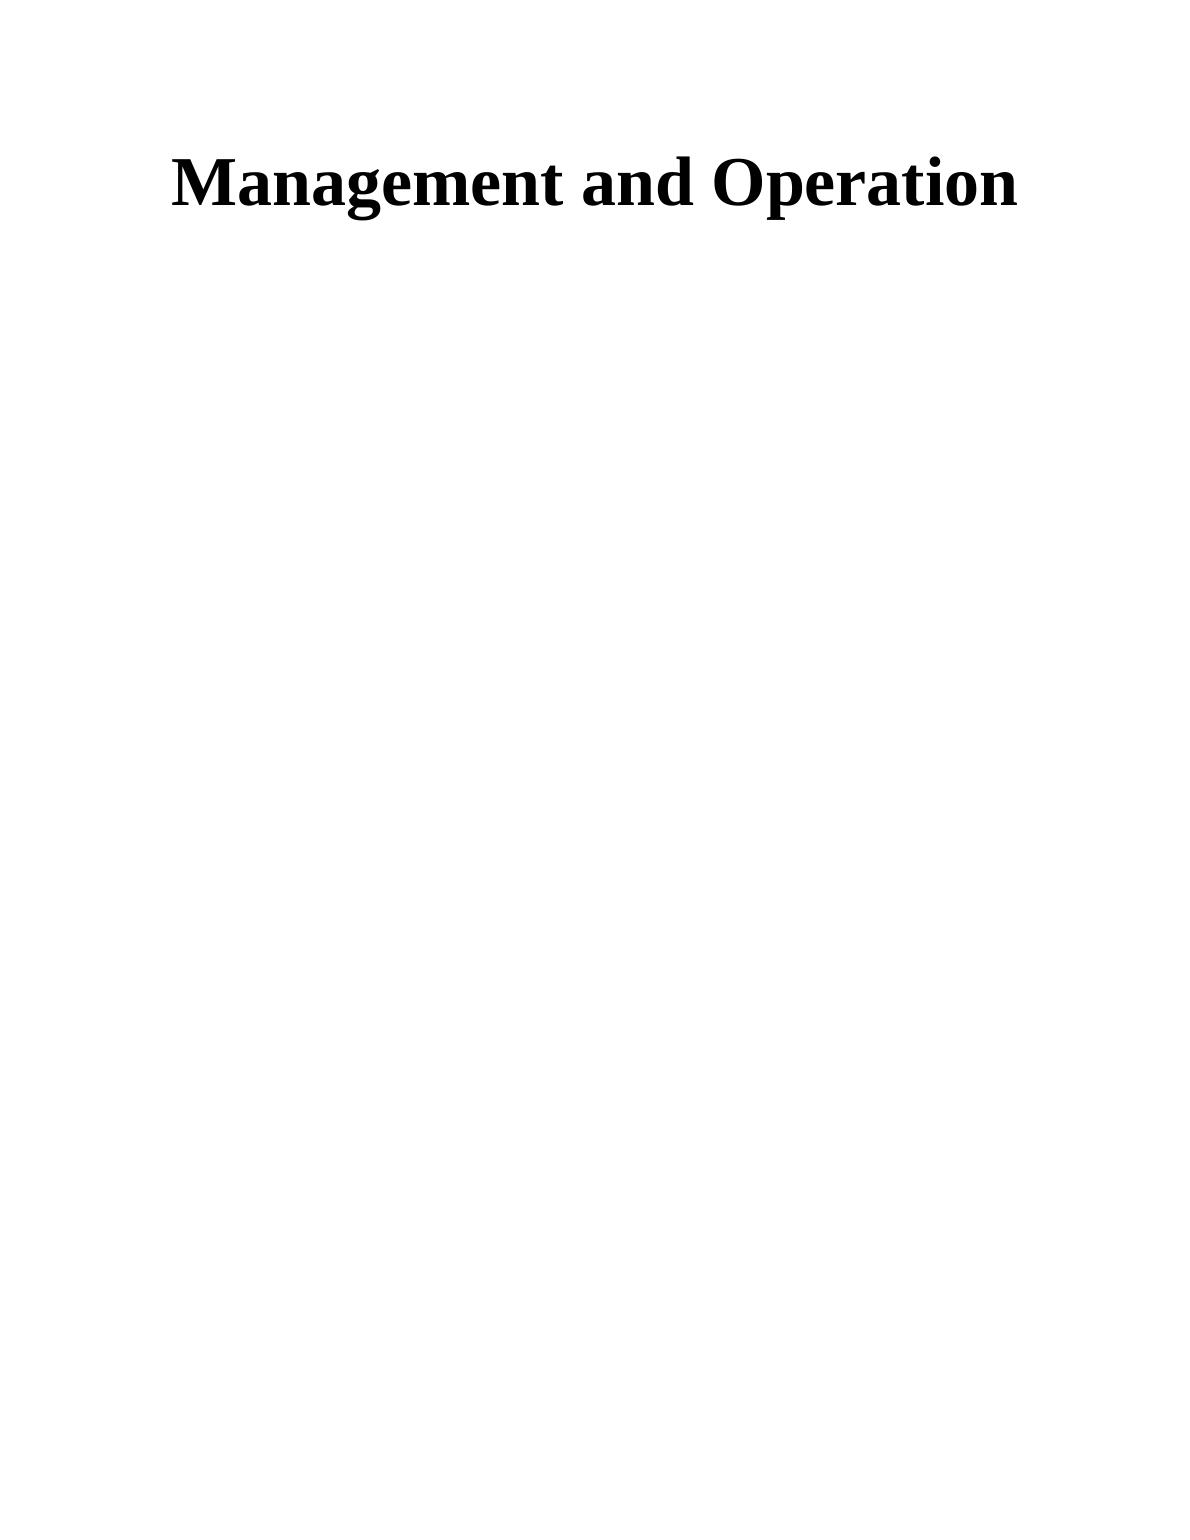 Leadership and Operation in Management and Operation_1